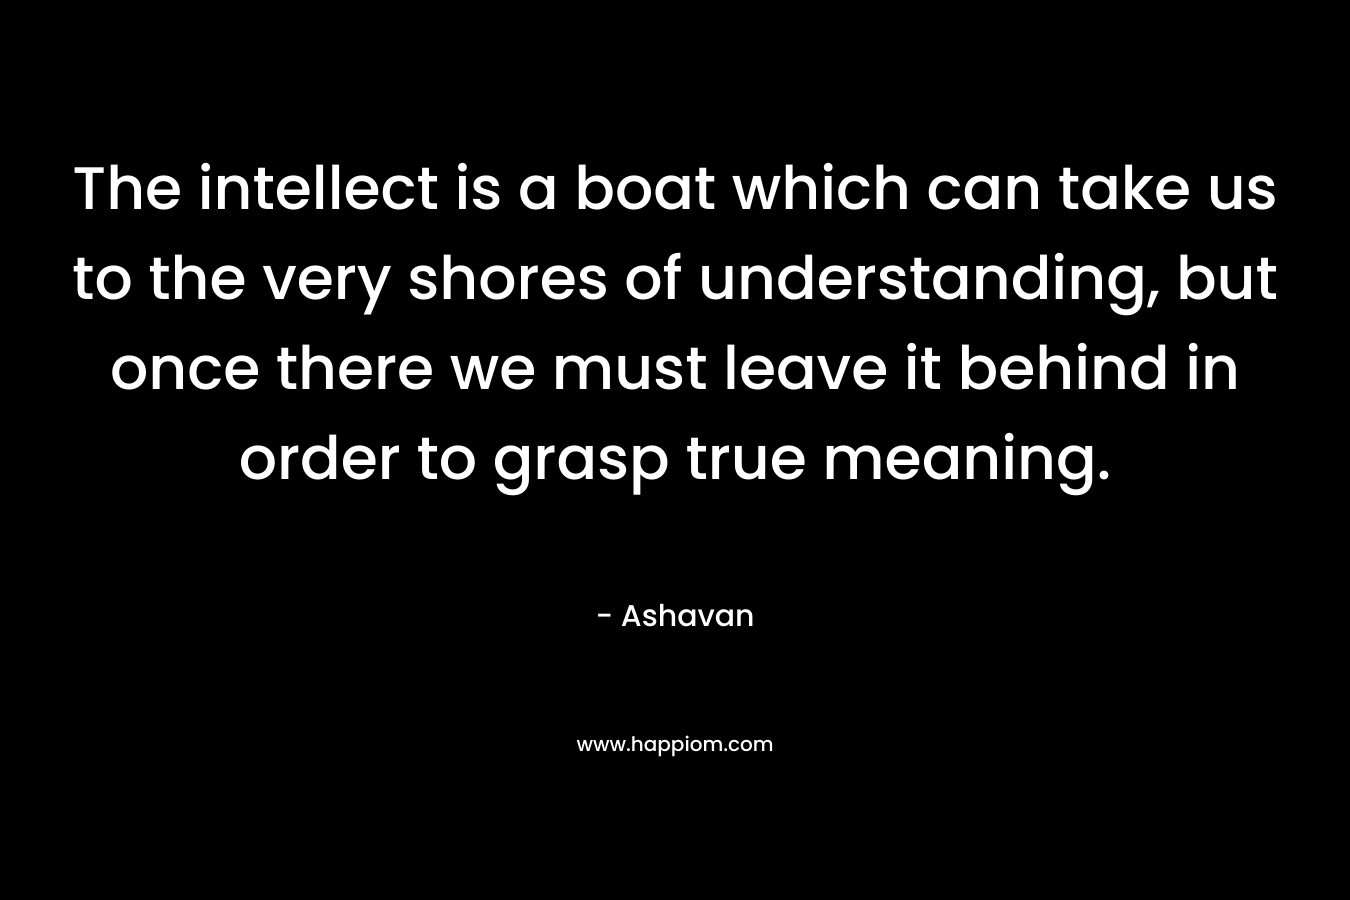 The intellect is a boat which can take us to the very shores of understanding, but once there we must leave it behind in order to grasp true meaning. – Ashavan